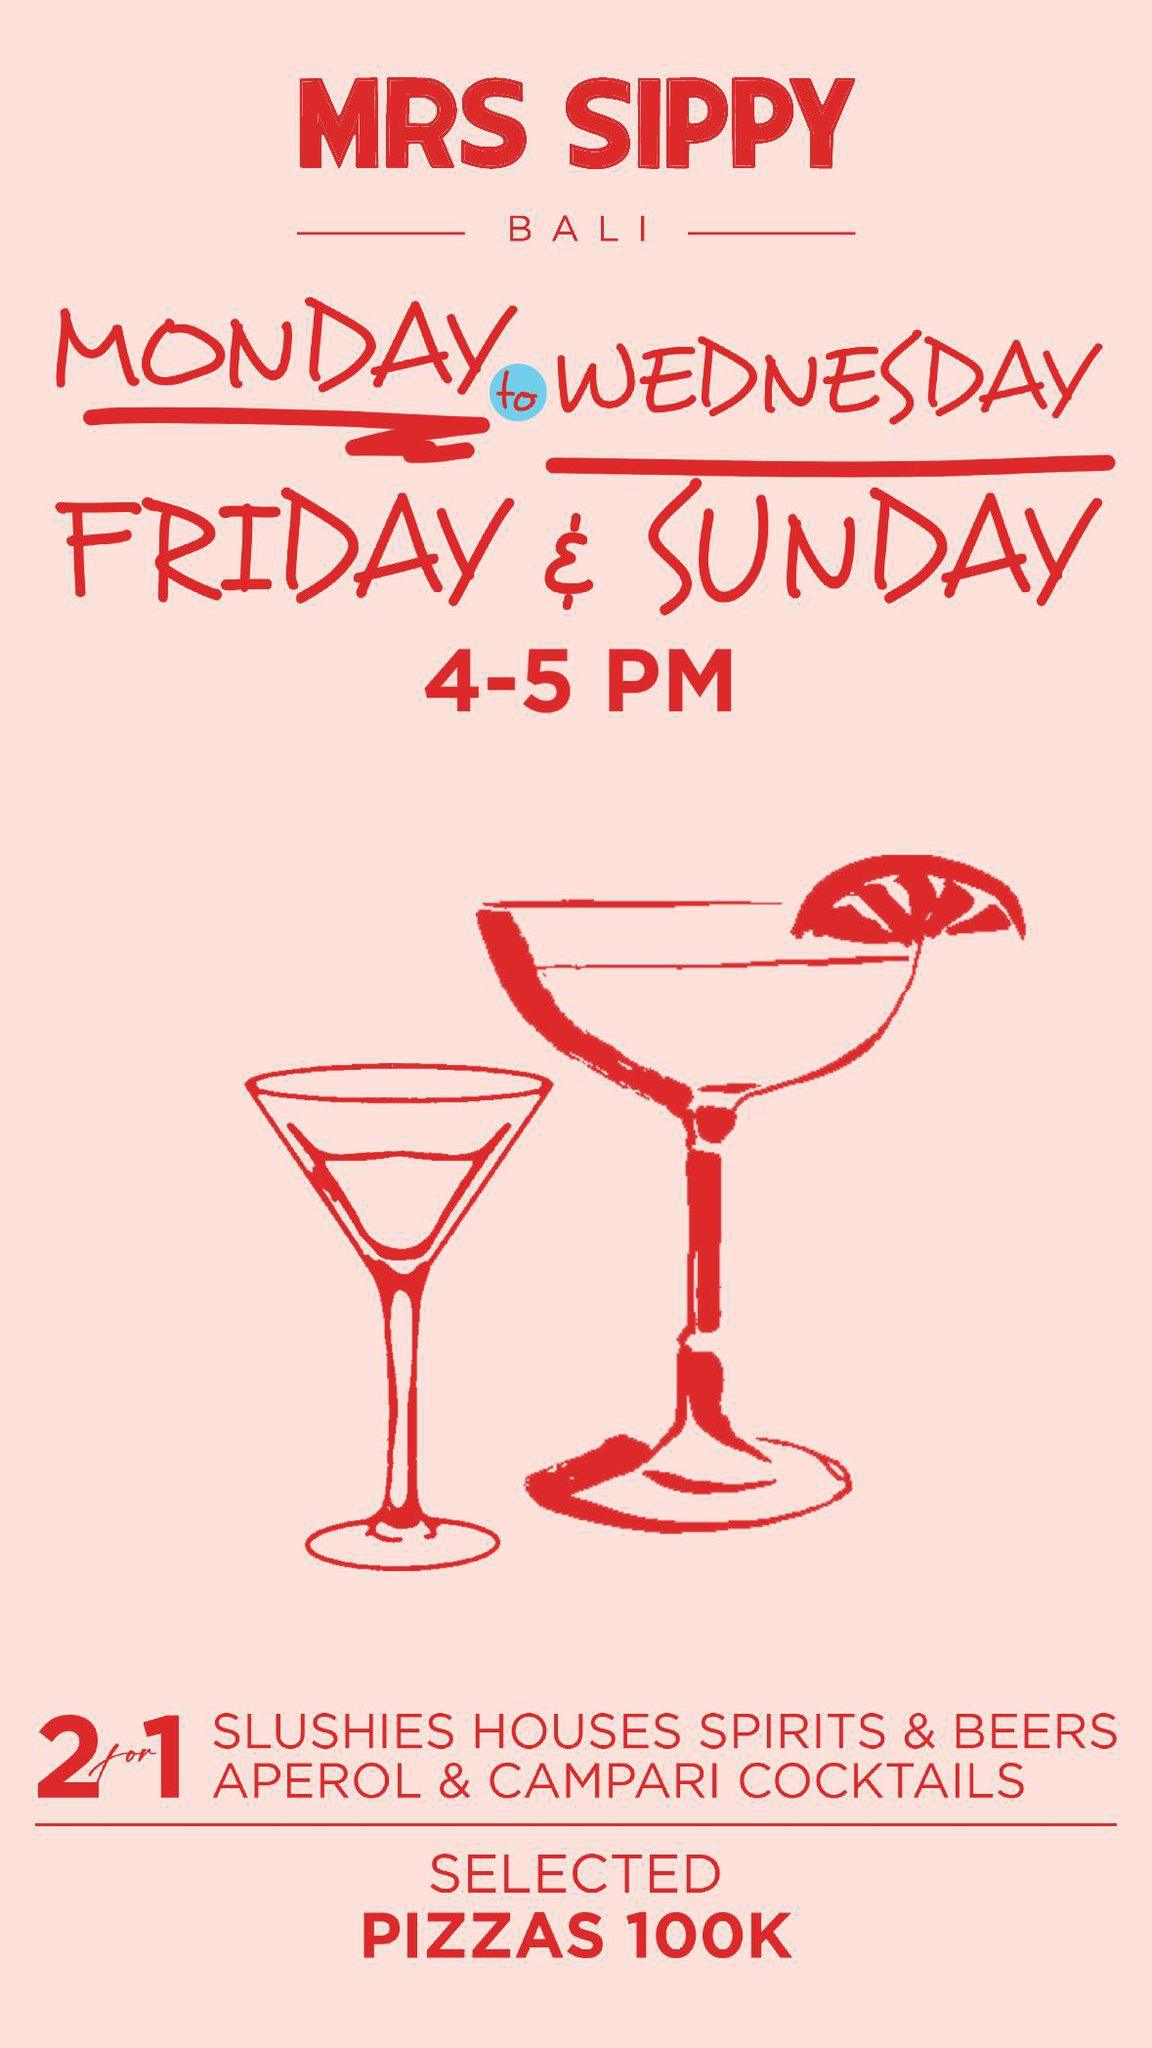 Wednesday Happy Hour at Mrs Sippy Bali, 4-5pm